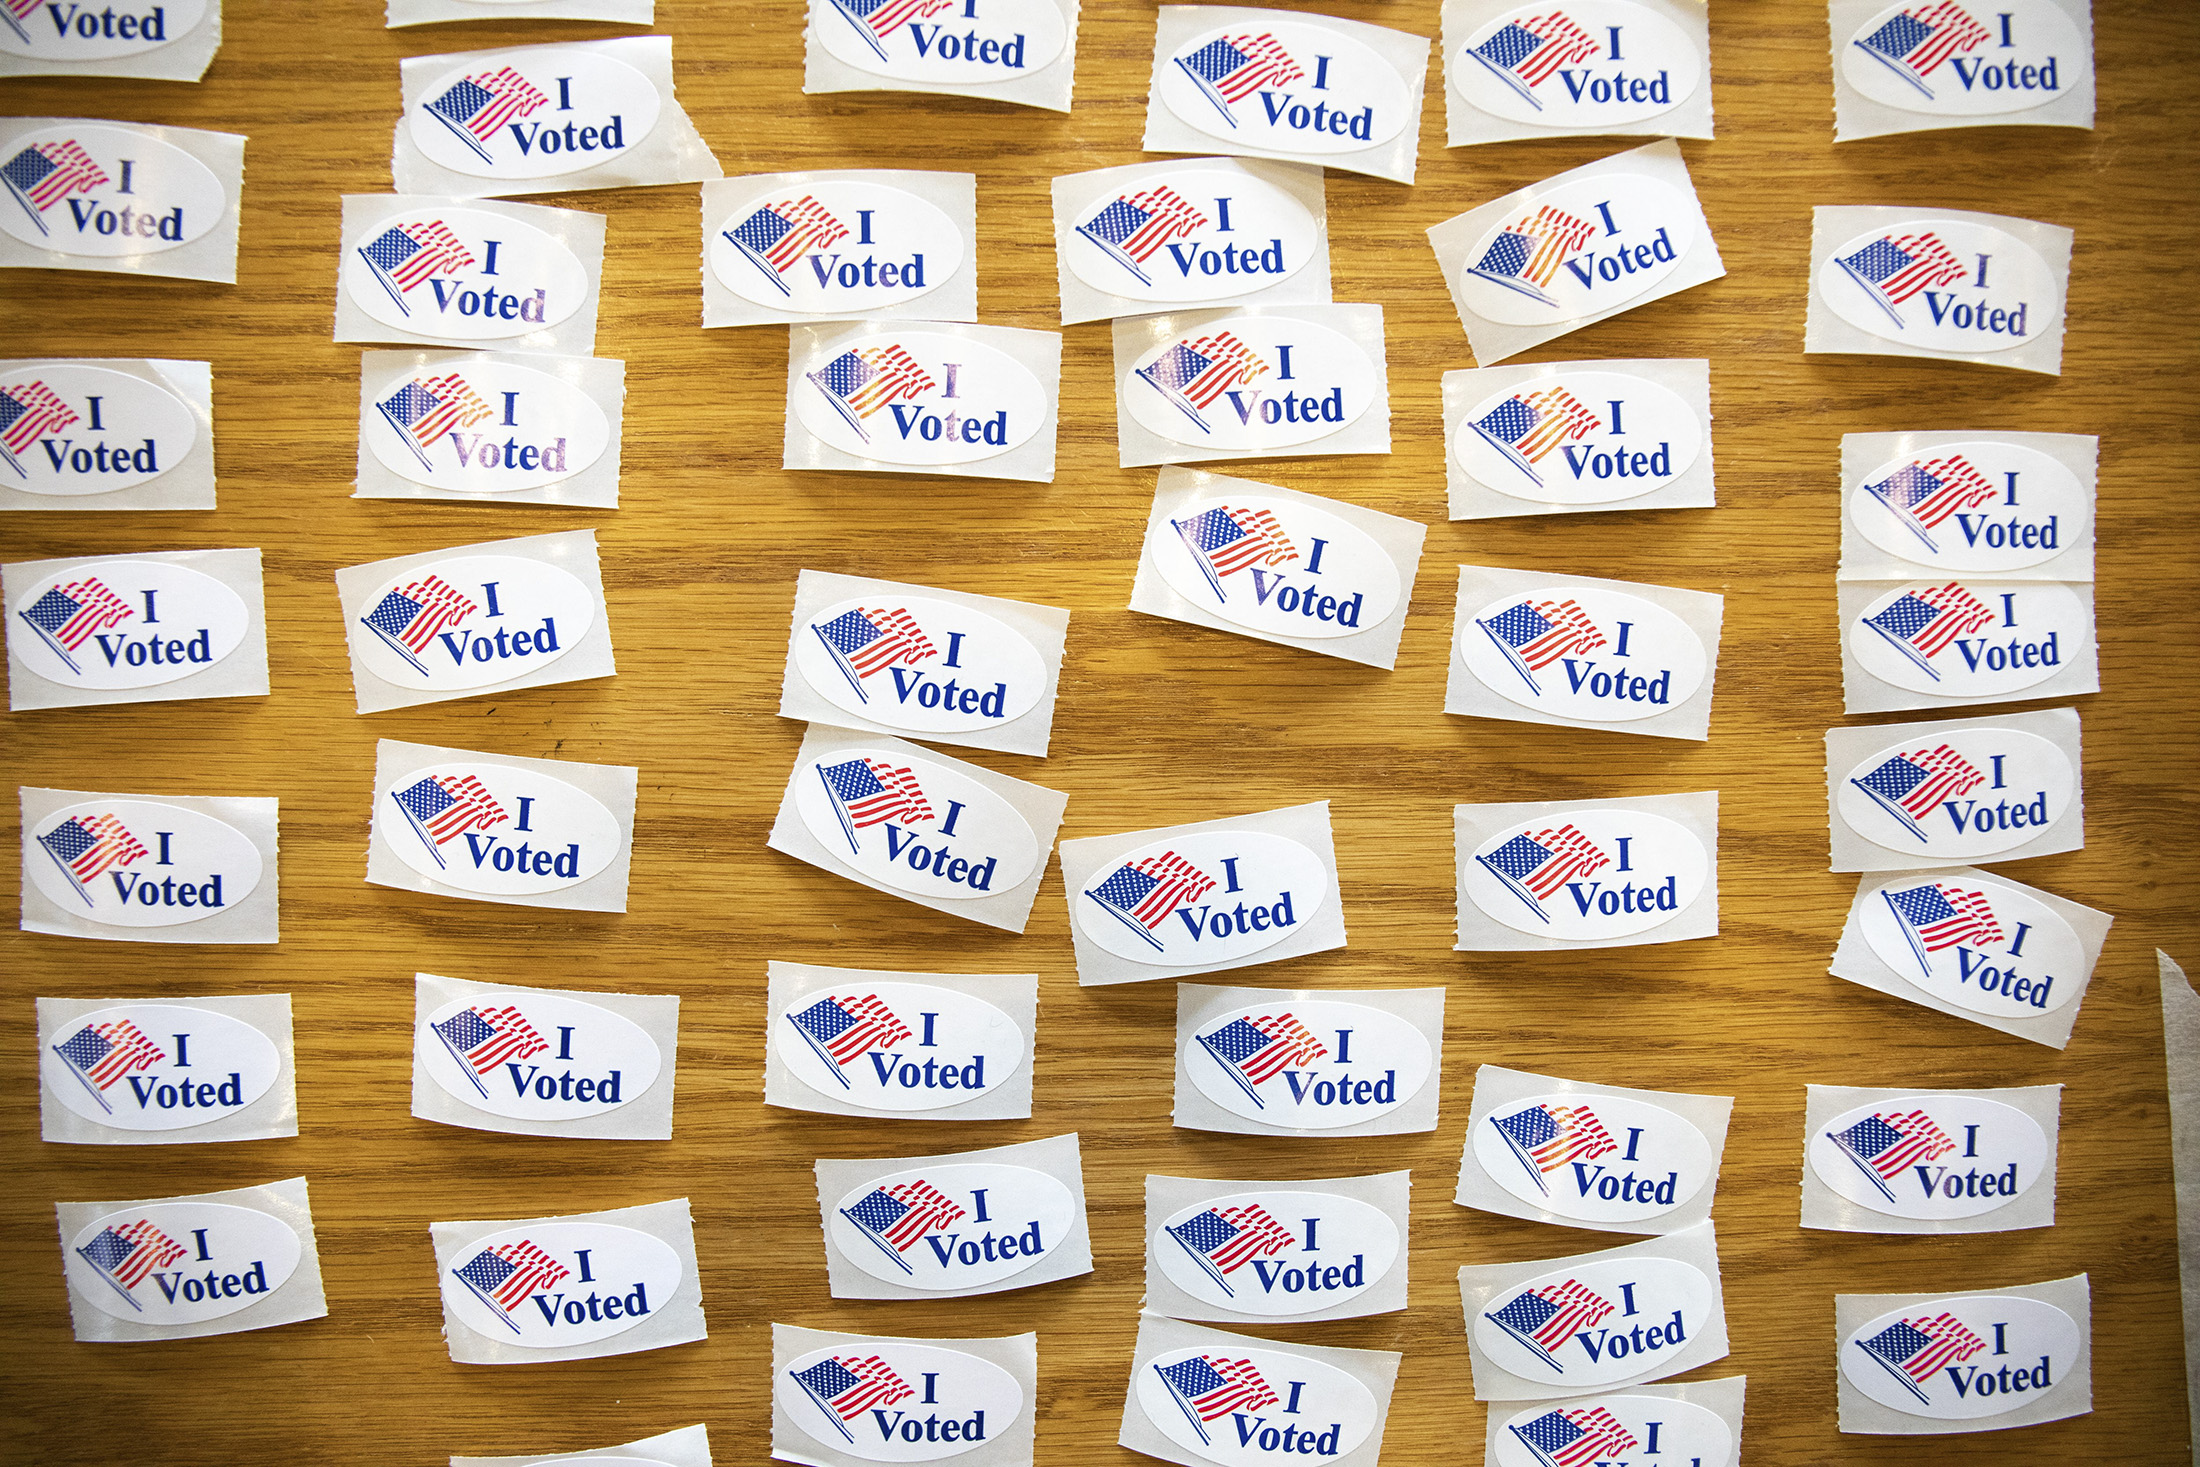 &quot;I Voted&quot; stickers during the North Carolina primary on Super Tuesday.